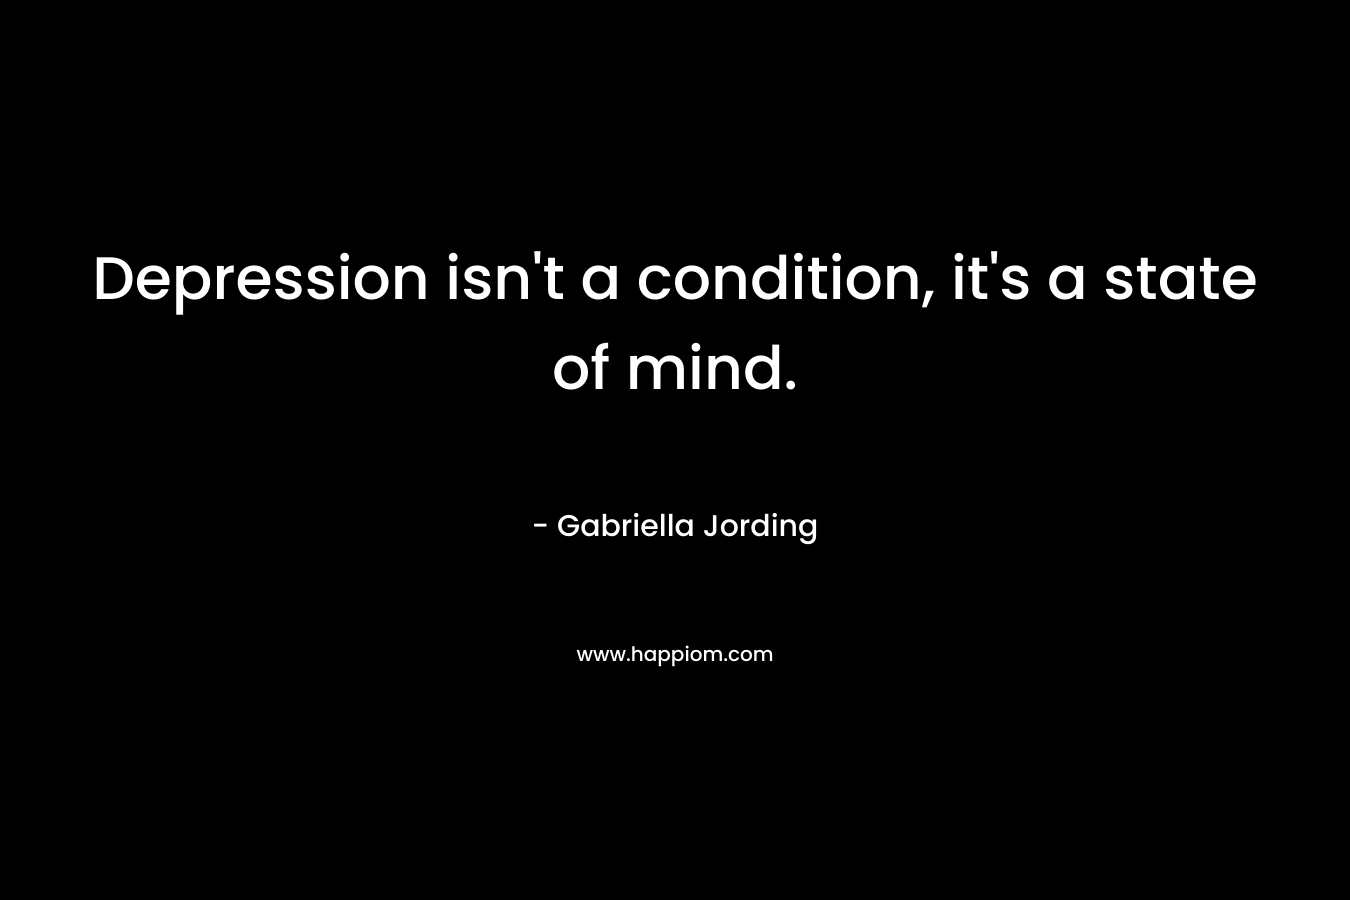 Depression isn't a condition, it's a state of mind.